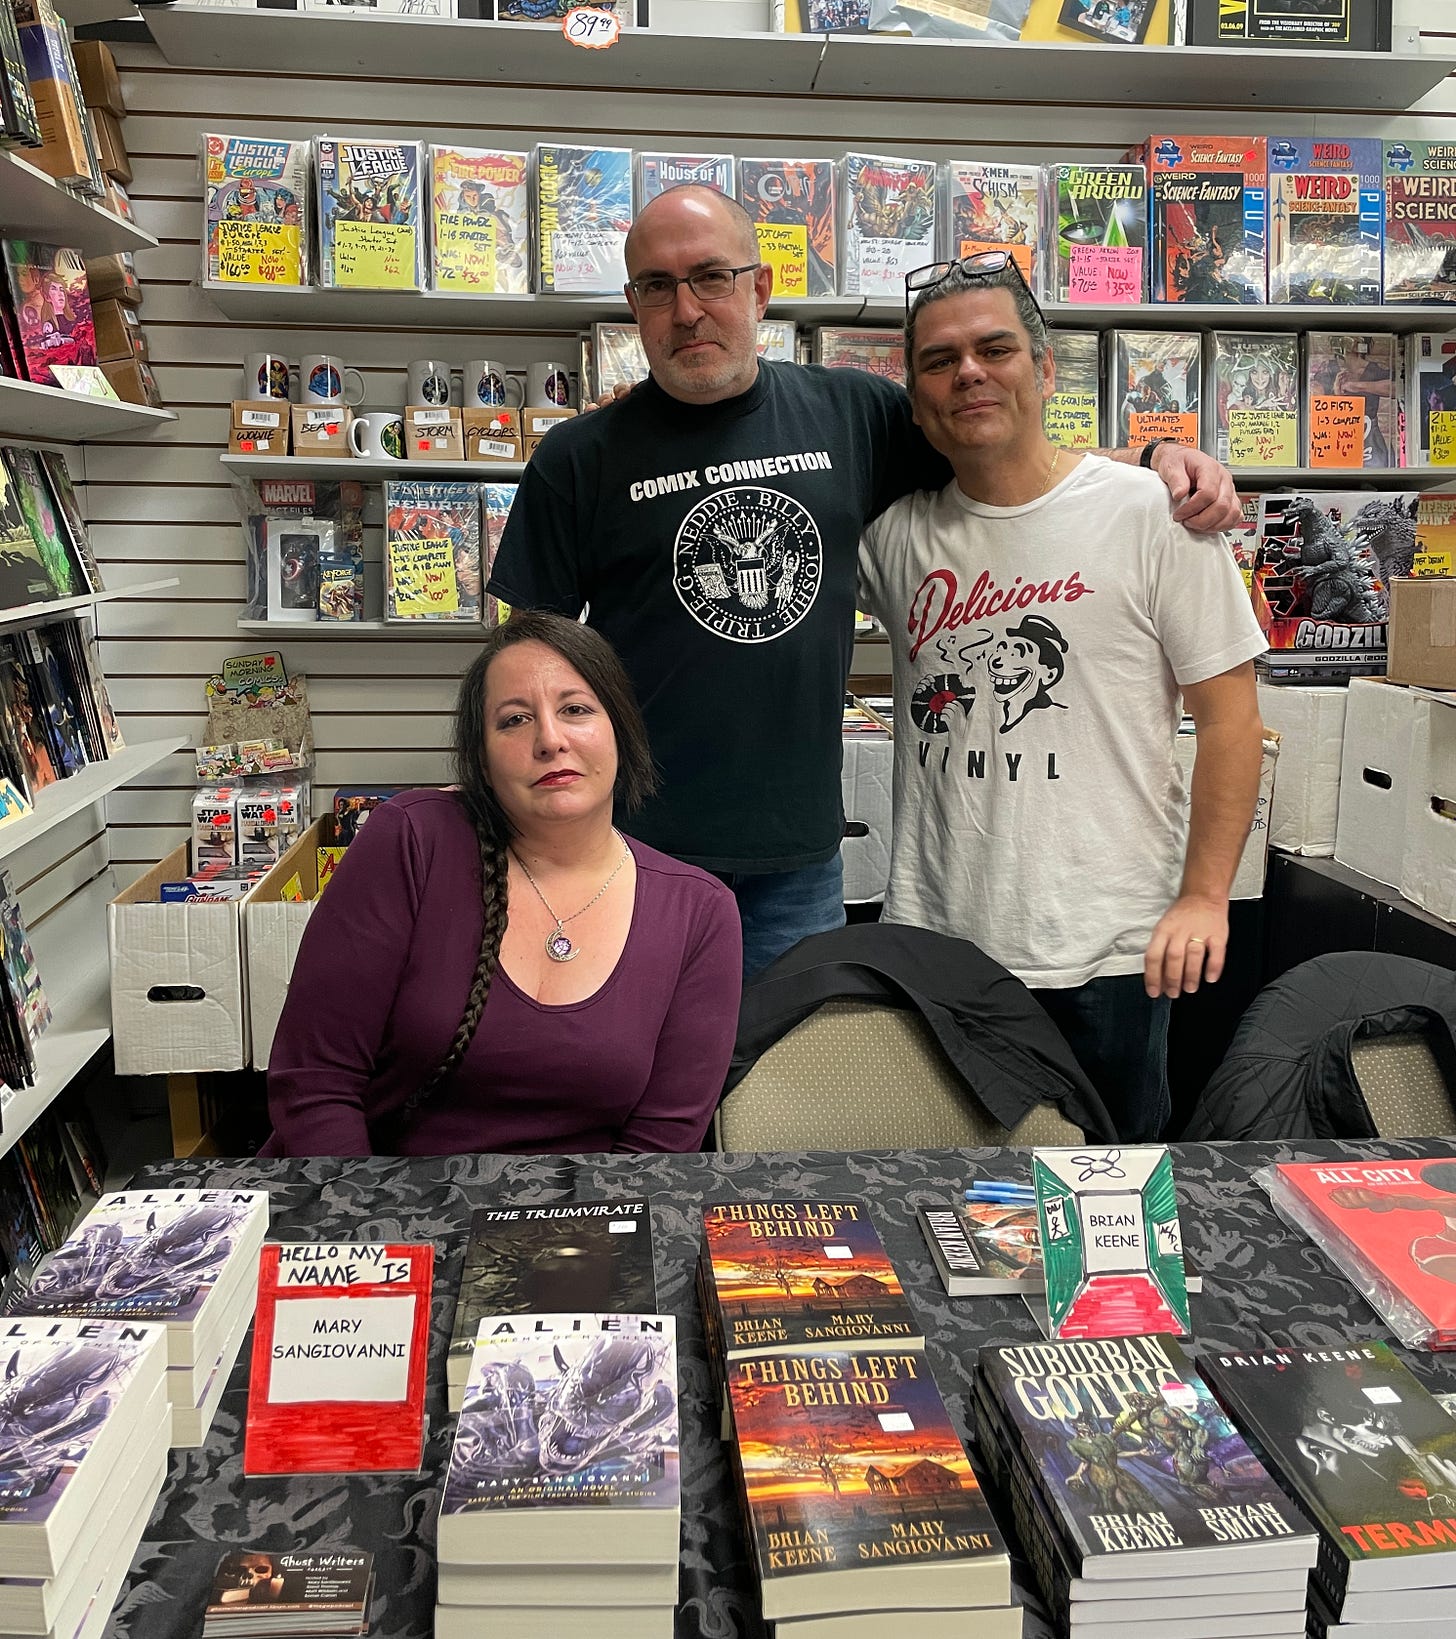 Mary SanGiovanni, Brian Keene, and Mike Hawthorne behind a table full of their books and comics.